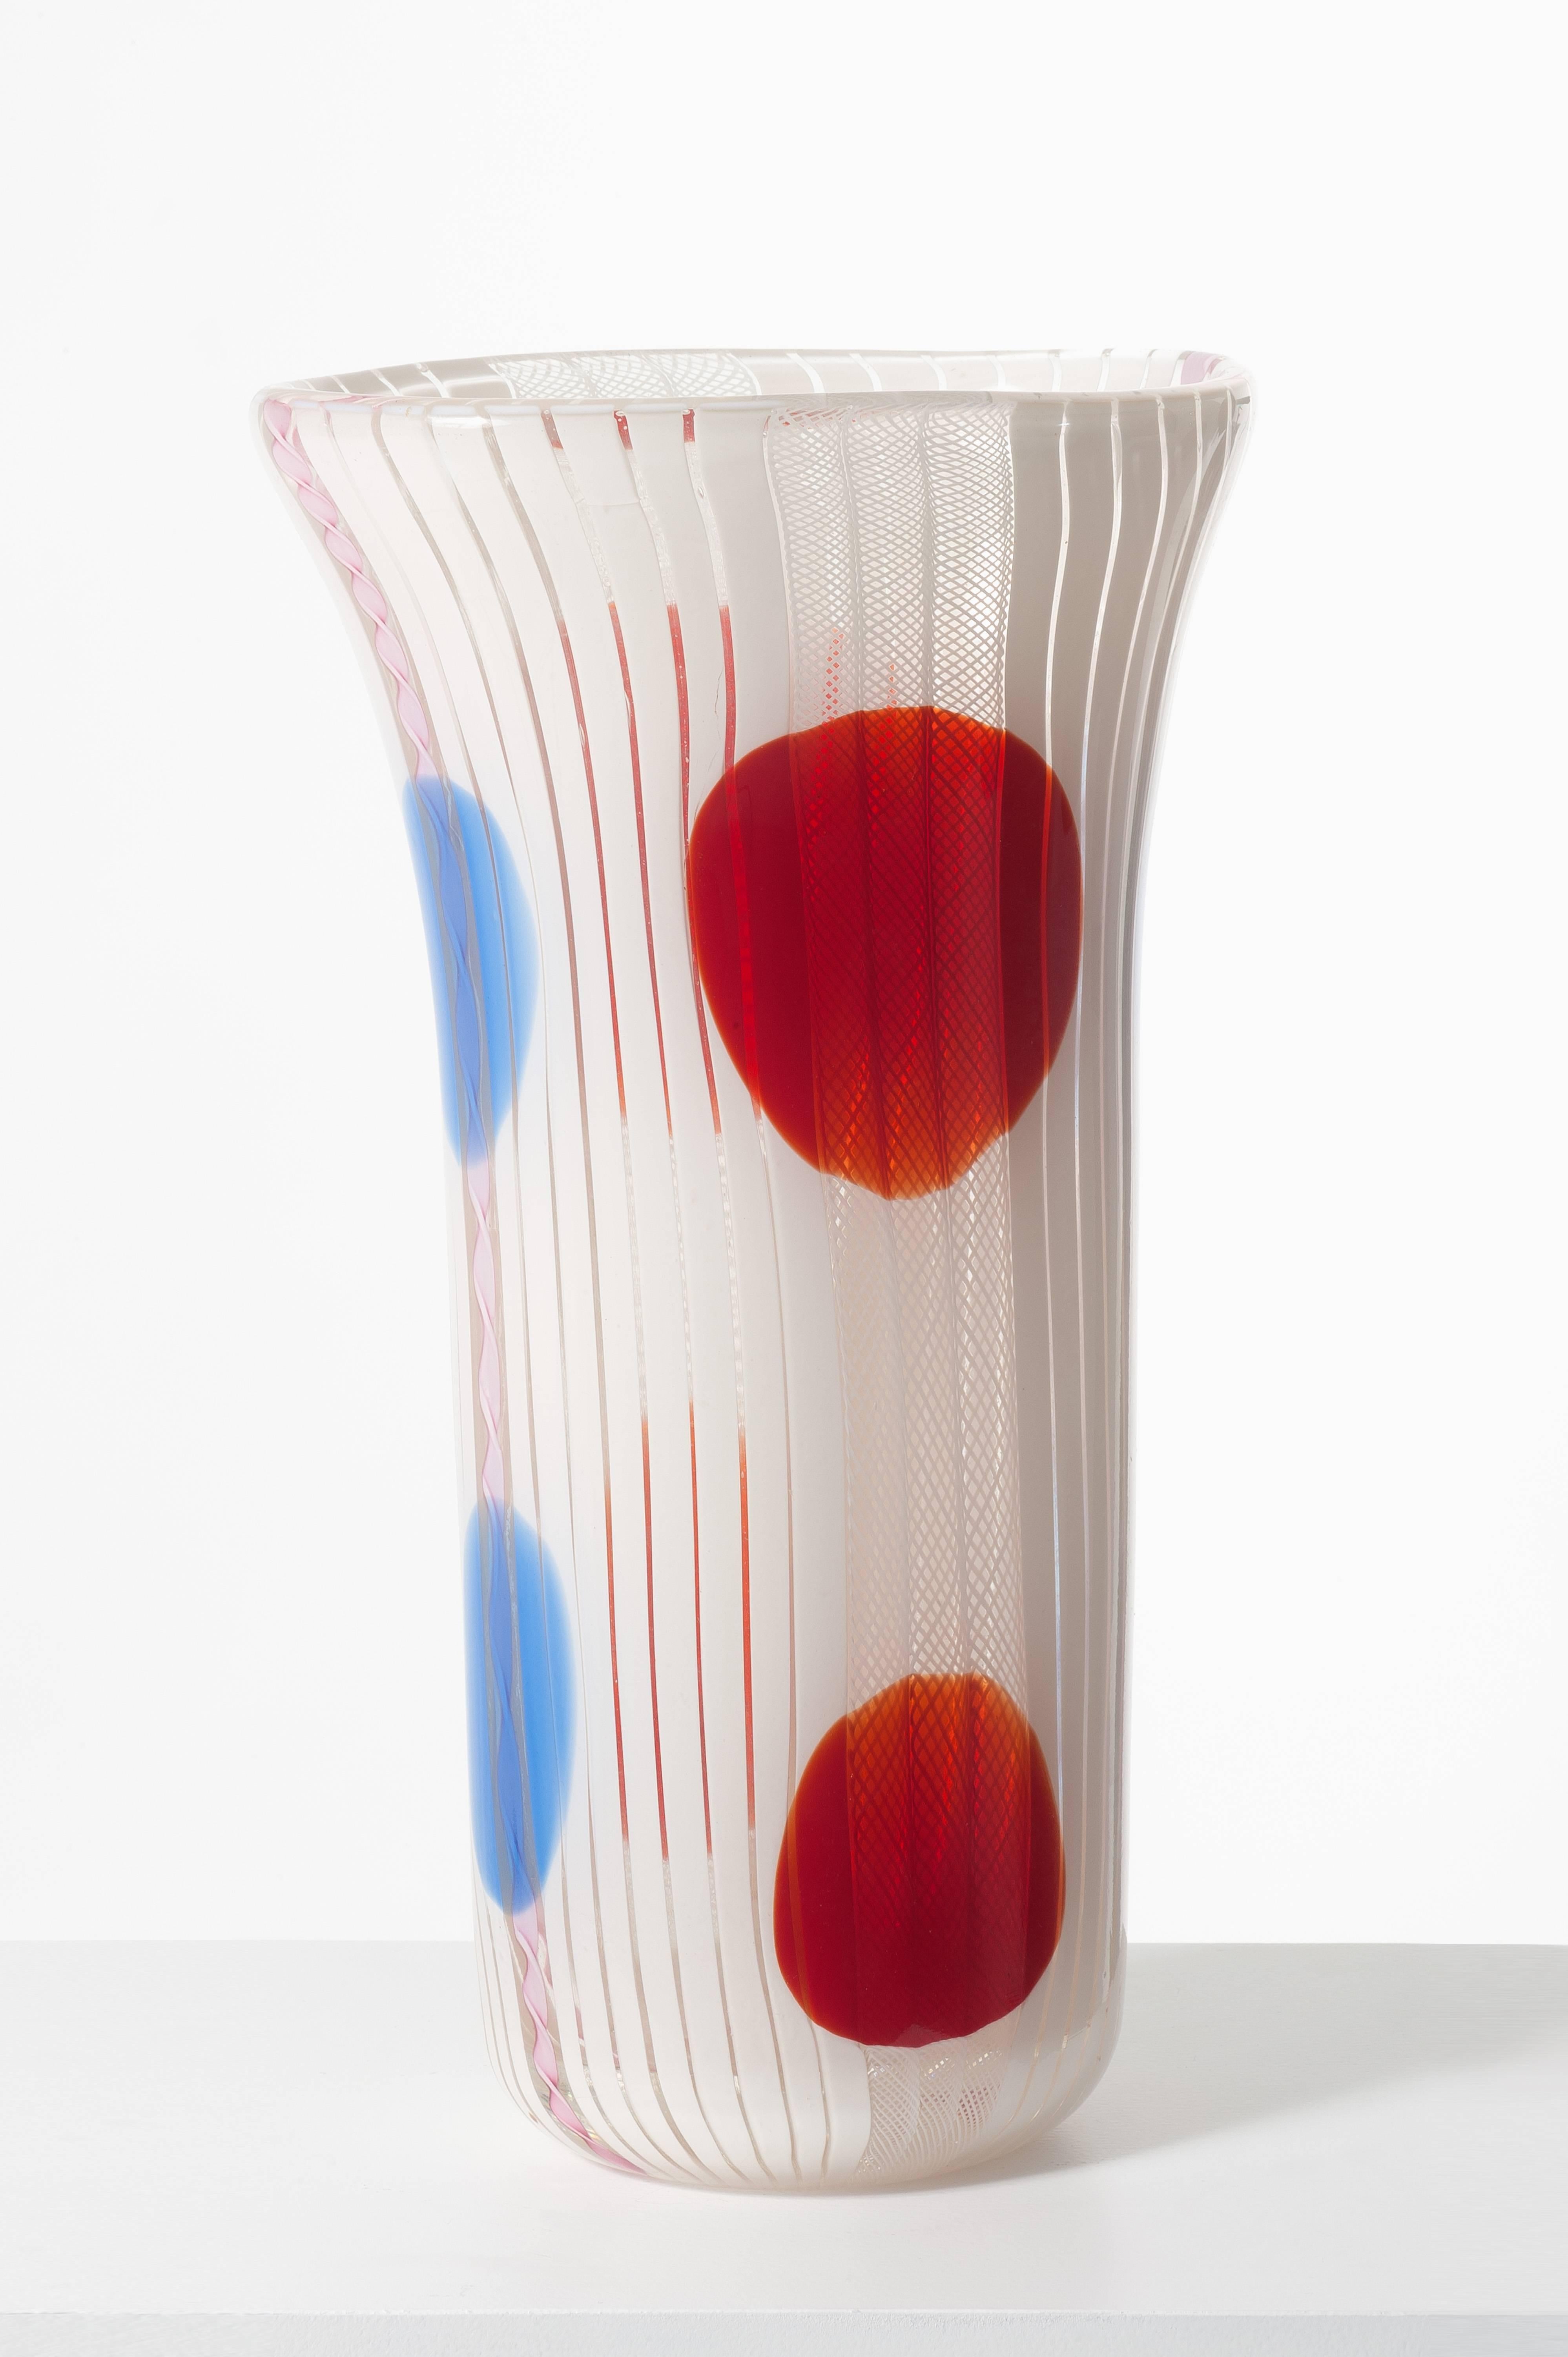 Vintage big white glass vase with geometric motive in blue and red glass manufactured by Avem Murano, Italy, circa 1955.

Measures: H 40 cm 23 x 19 cm.